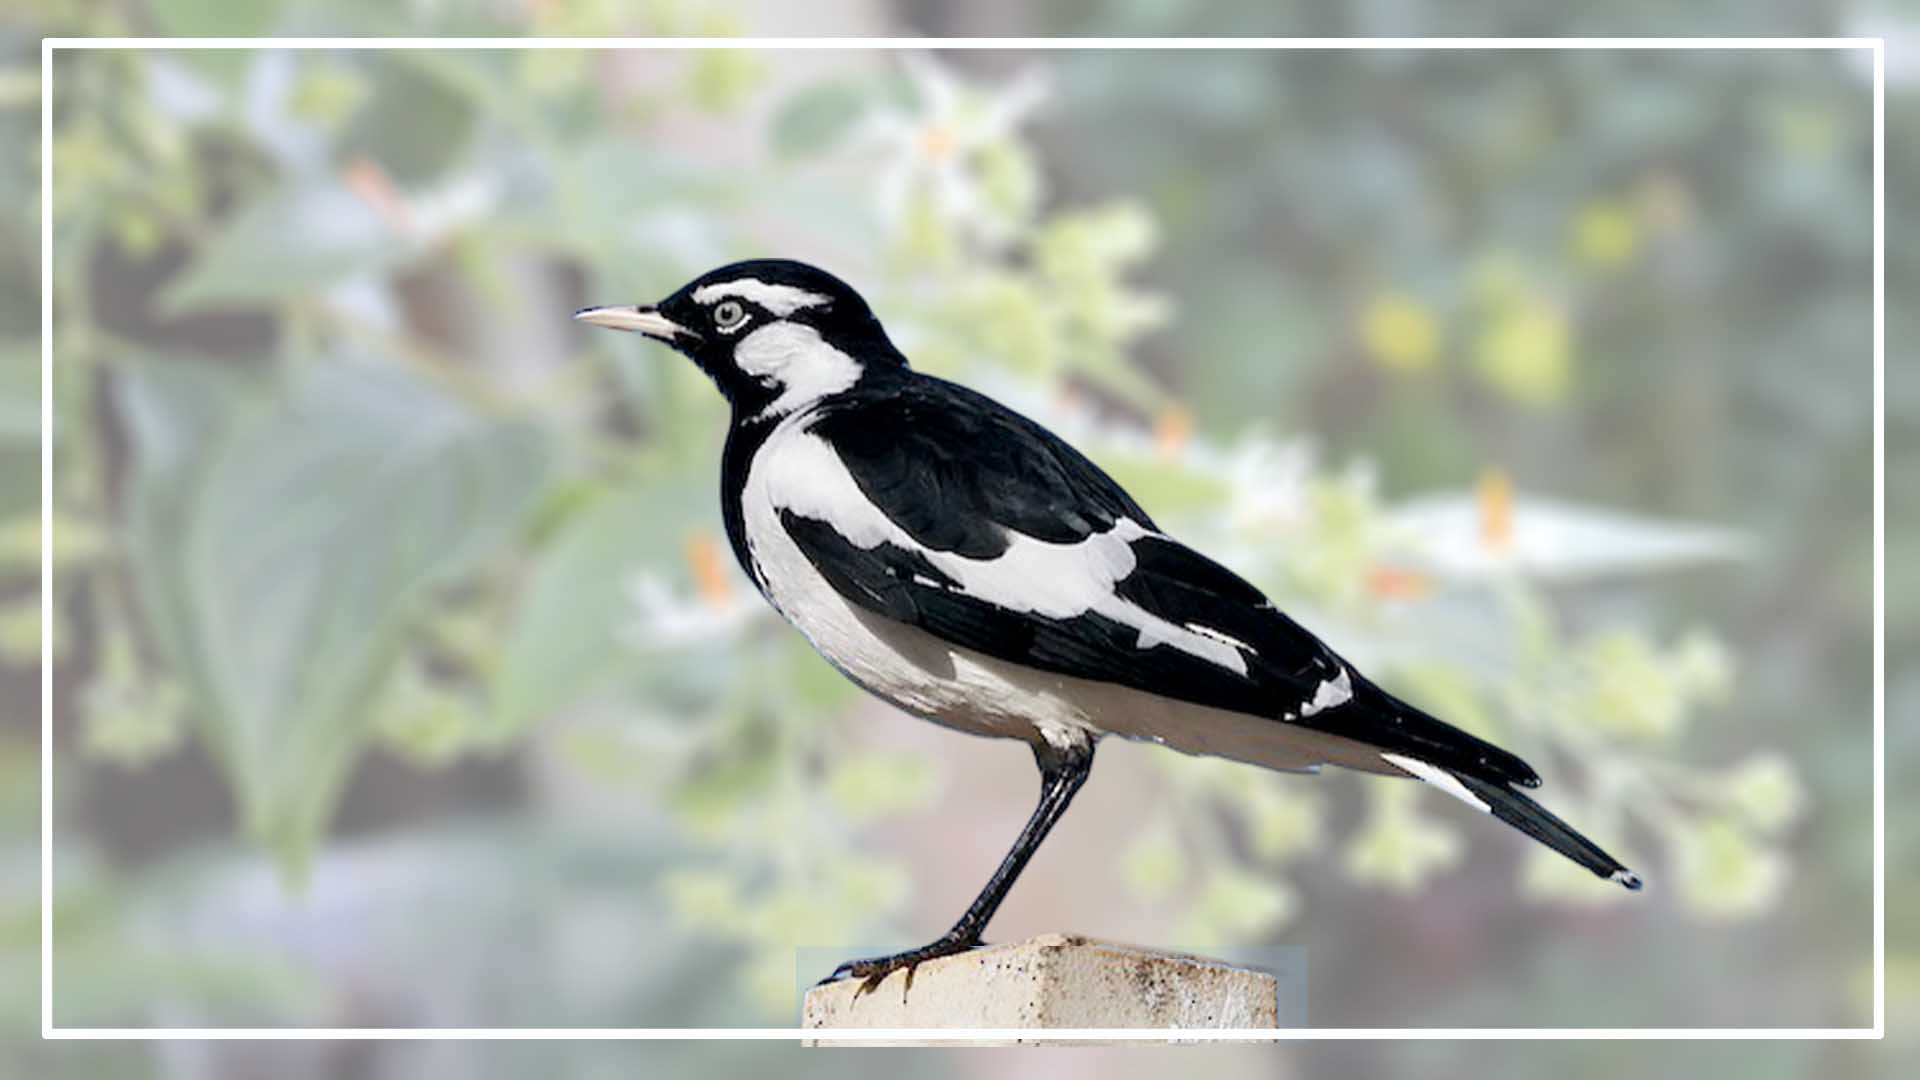 Magpie Lark is a Black Bird With White Stripes On Wings And Tails